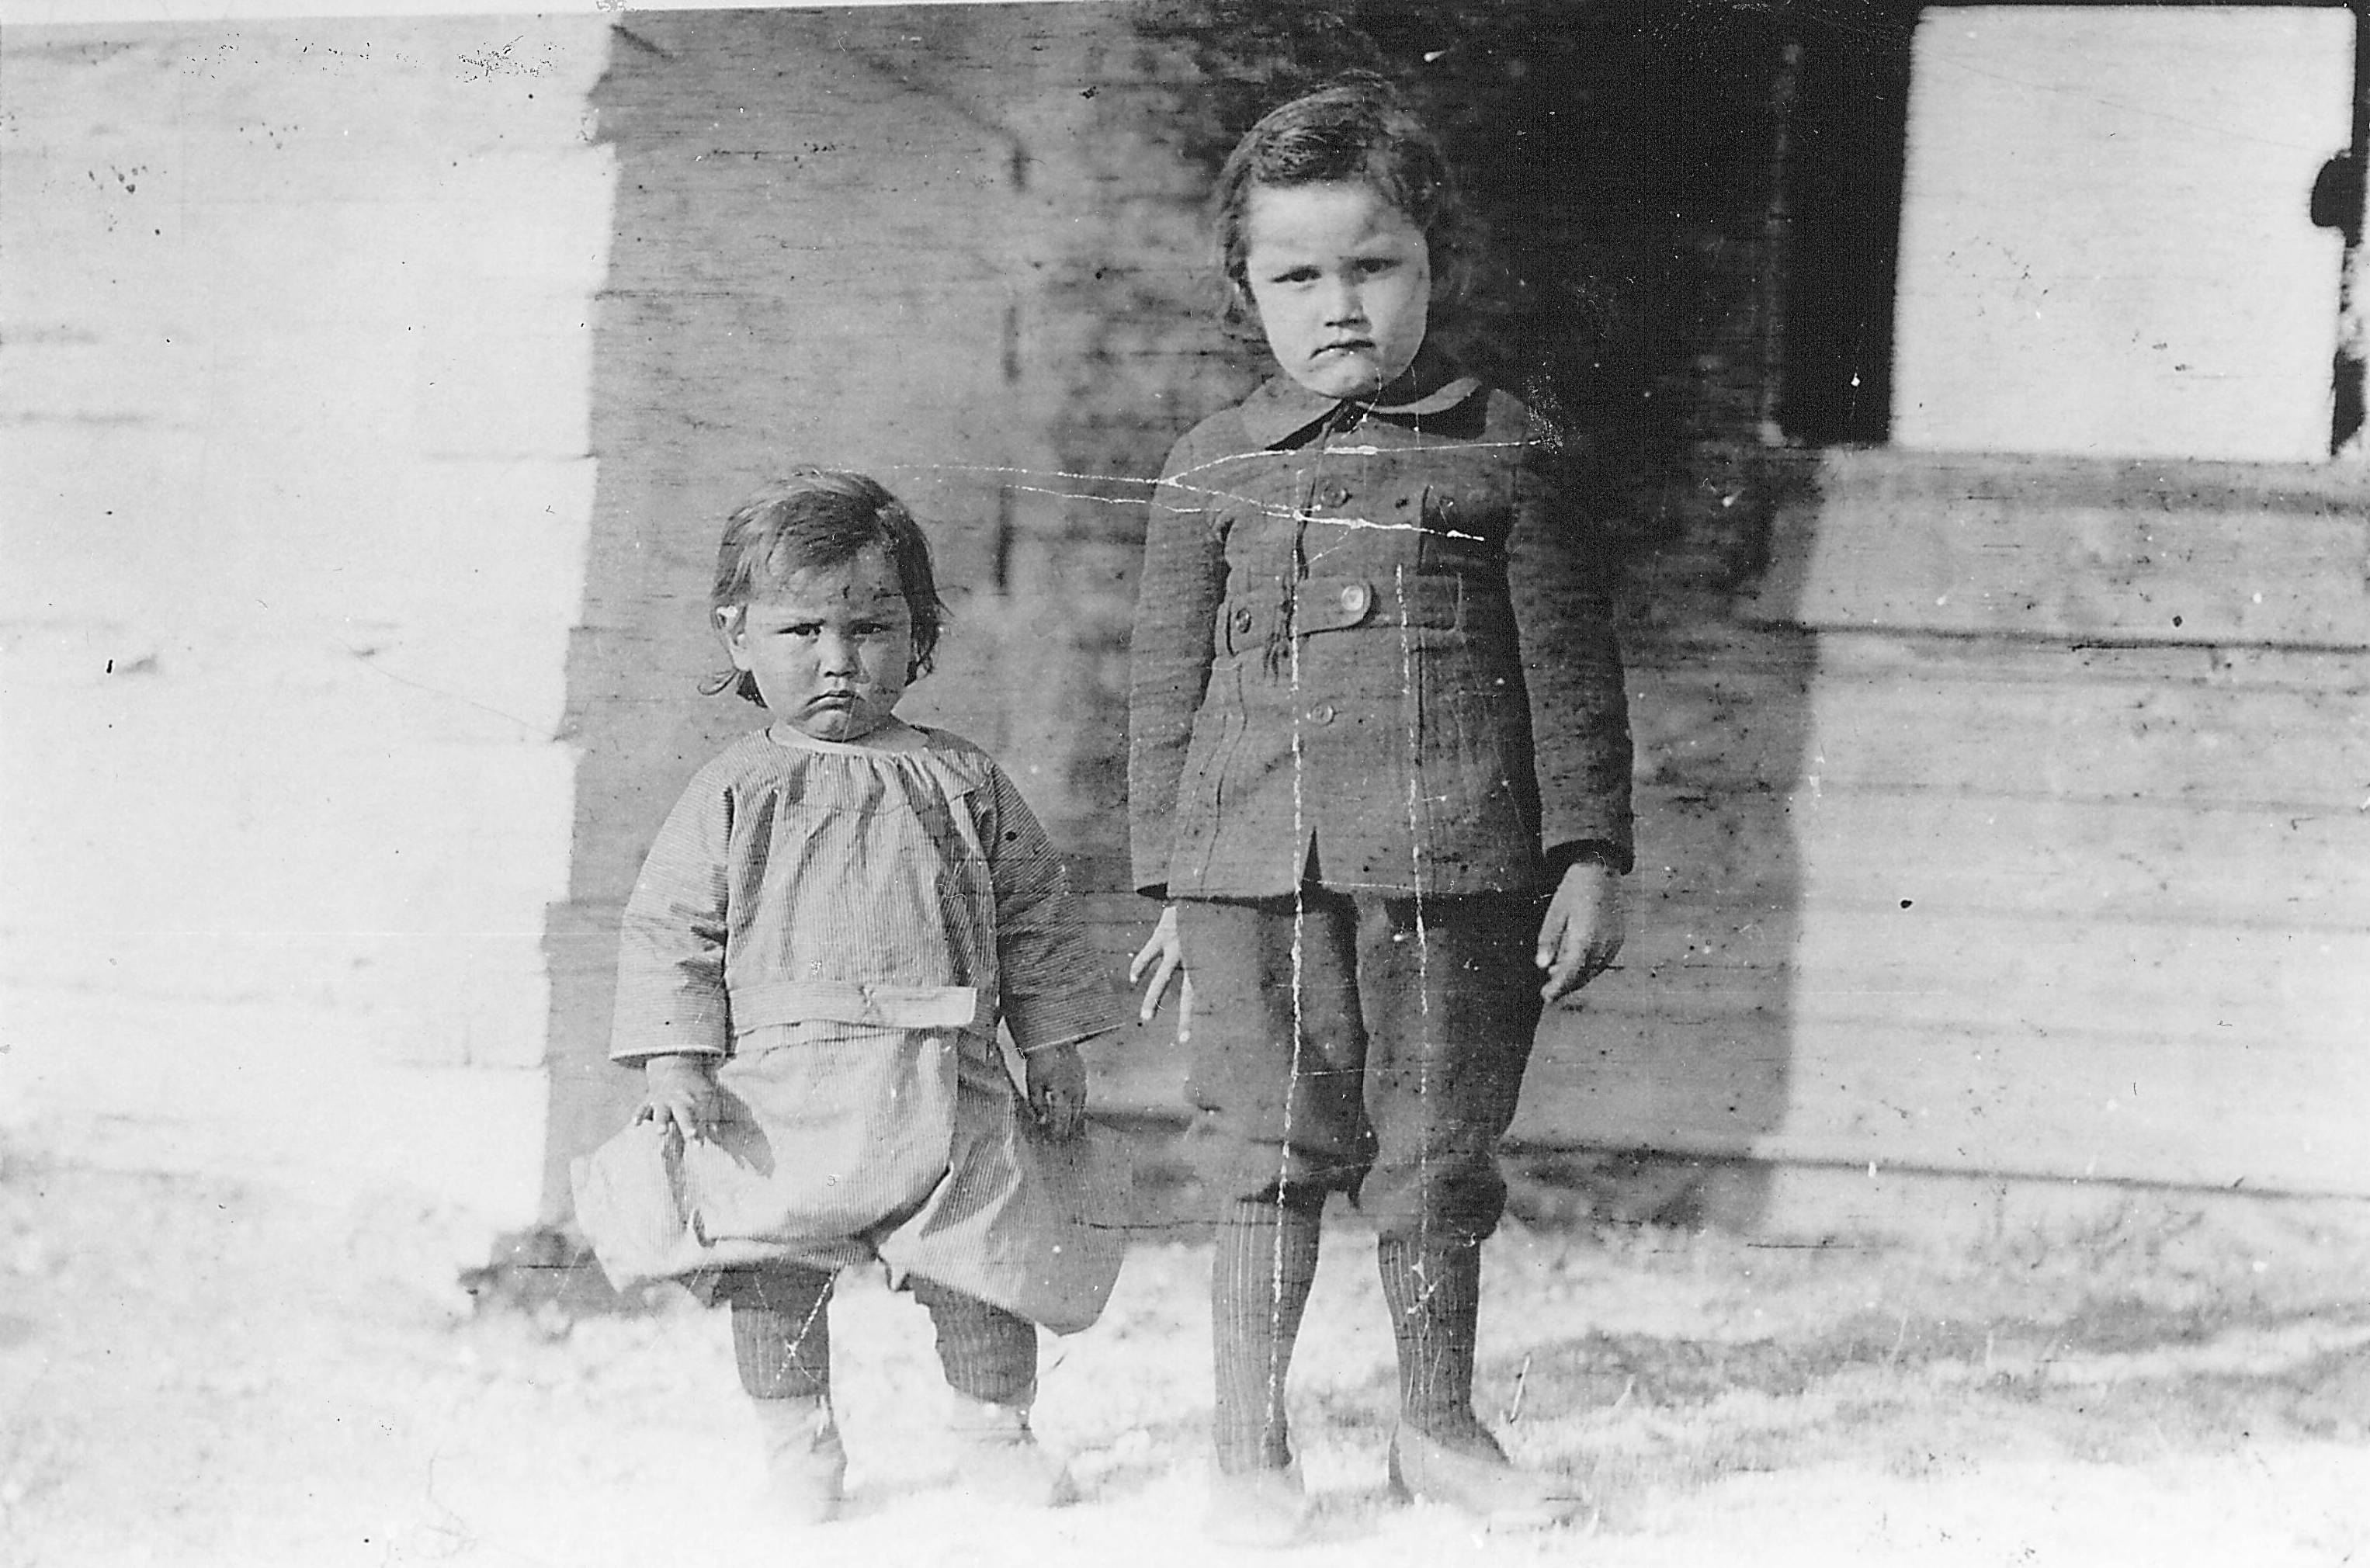 Look at these Cuties! They don't appear to impressed with the photographer and our best guess is they are siblings. Perhaps this is a 'Baby' picture of someone you know! Comment below if you have any leads!
990.4.106.39 / Ward, Vera